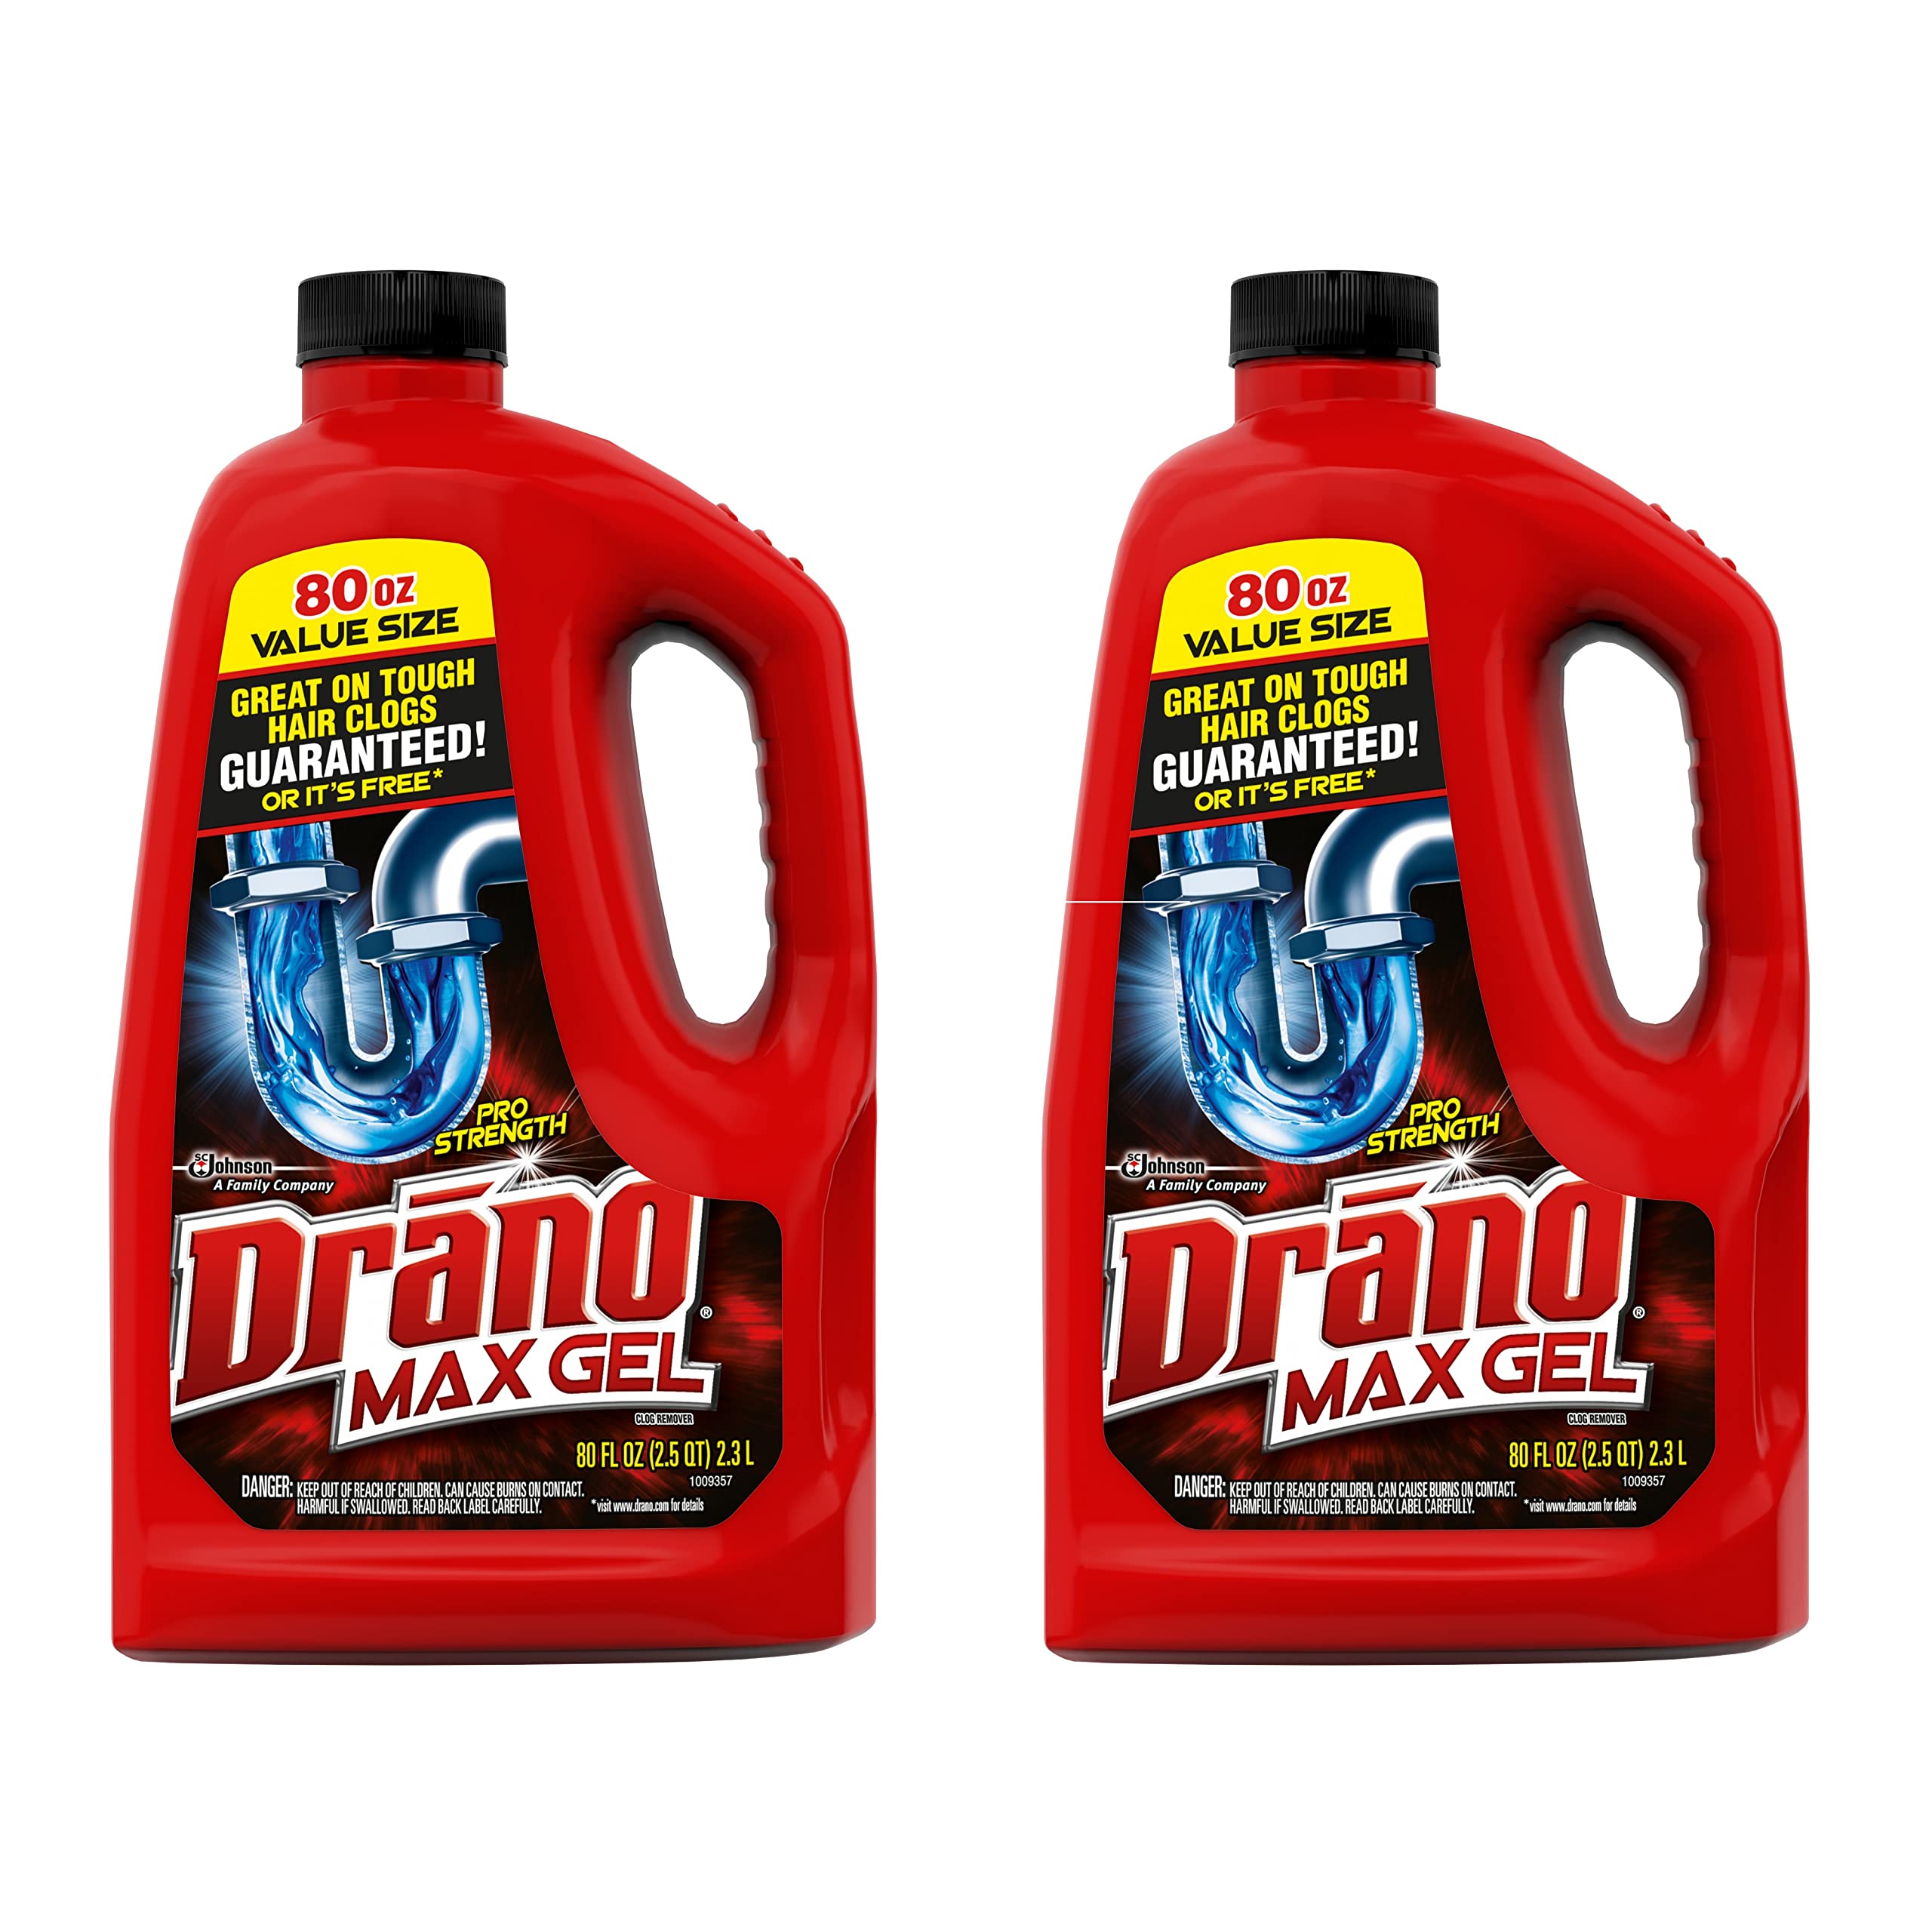 What happens if you get a little Drano in your mouth